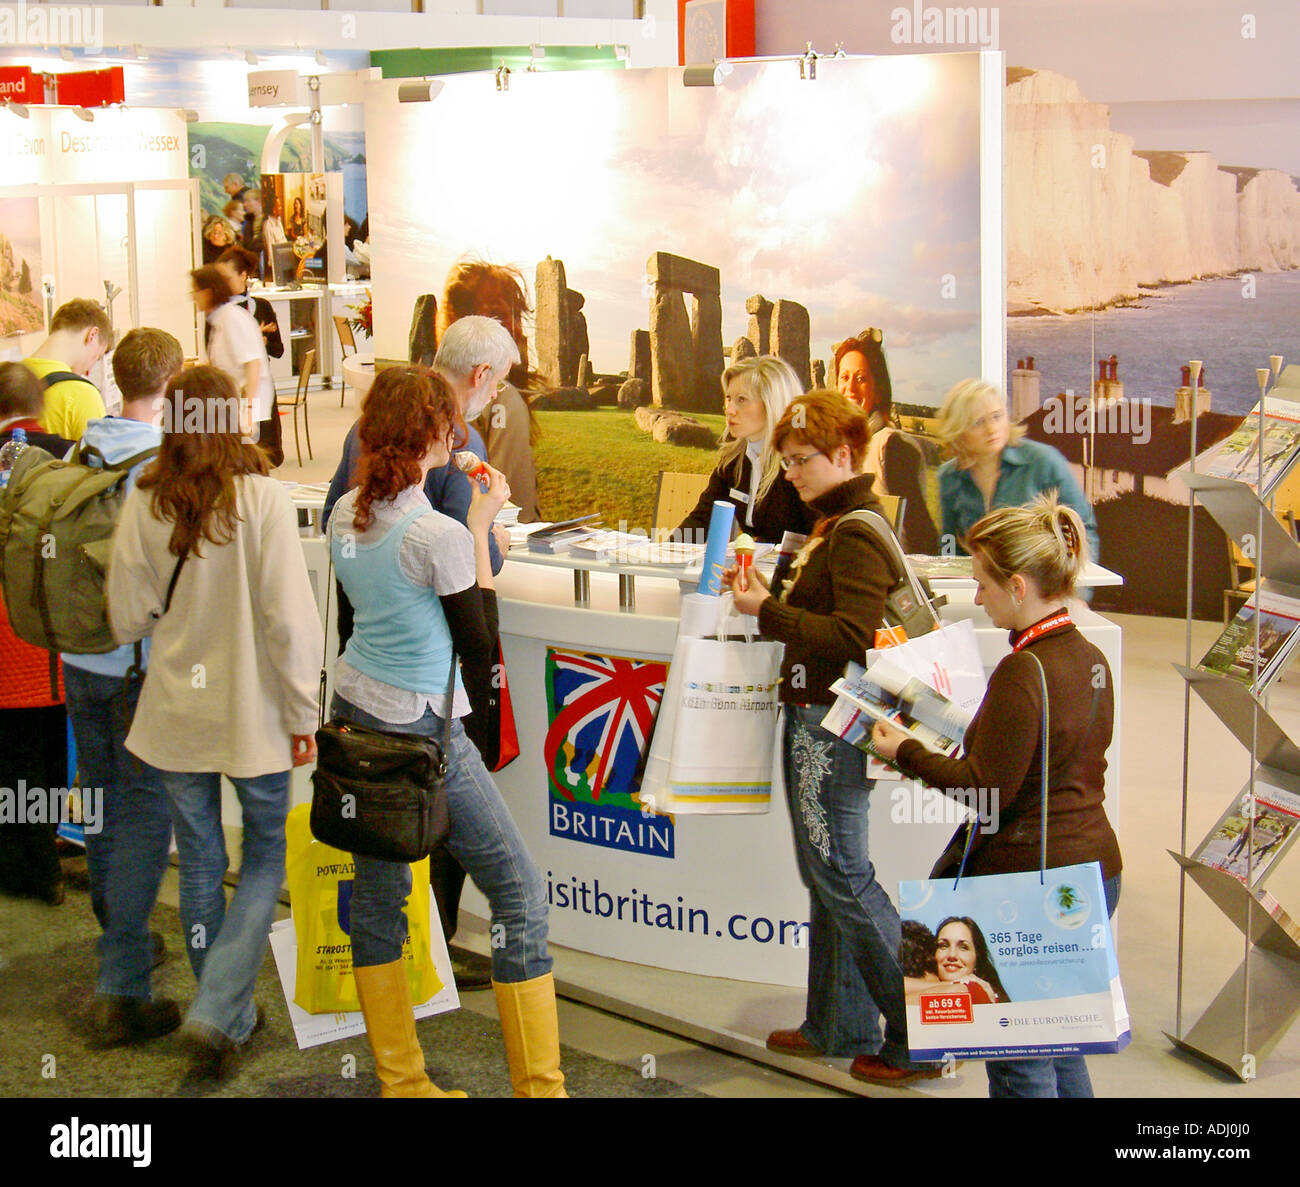 The annual Berlin International Travel Fair Messe tourism industry trade fair stands exhibition displays Stock Photo